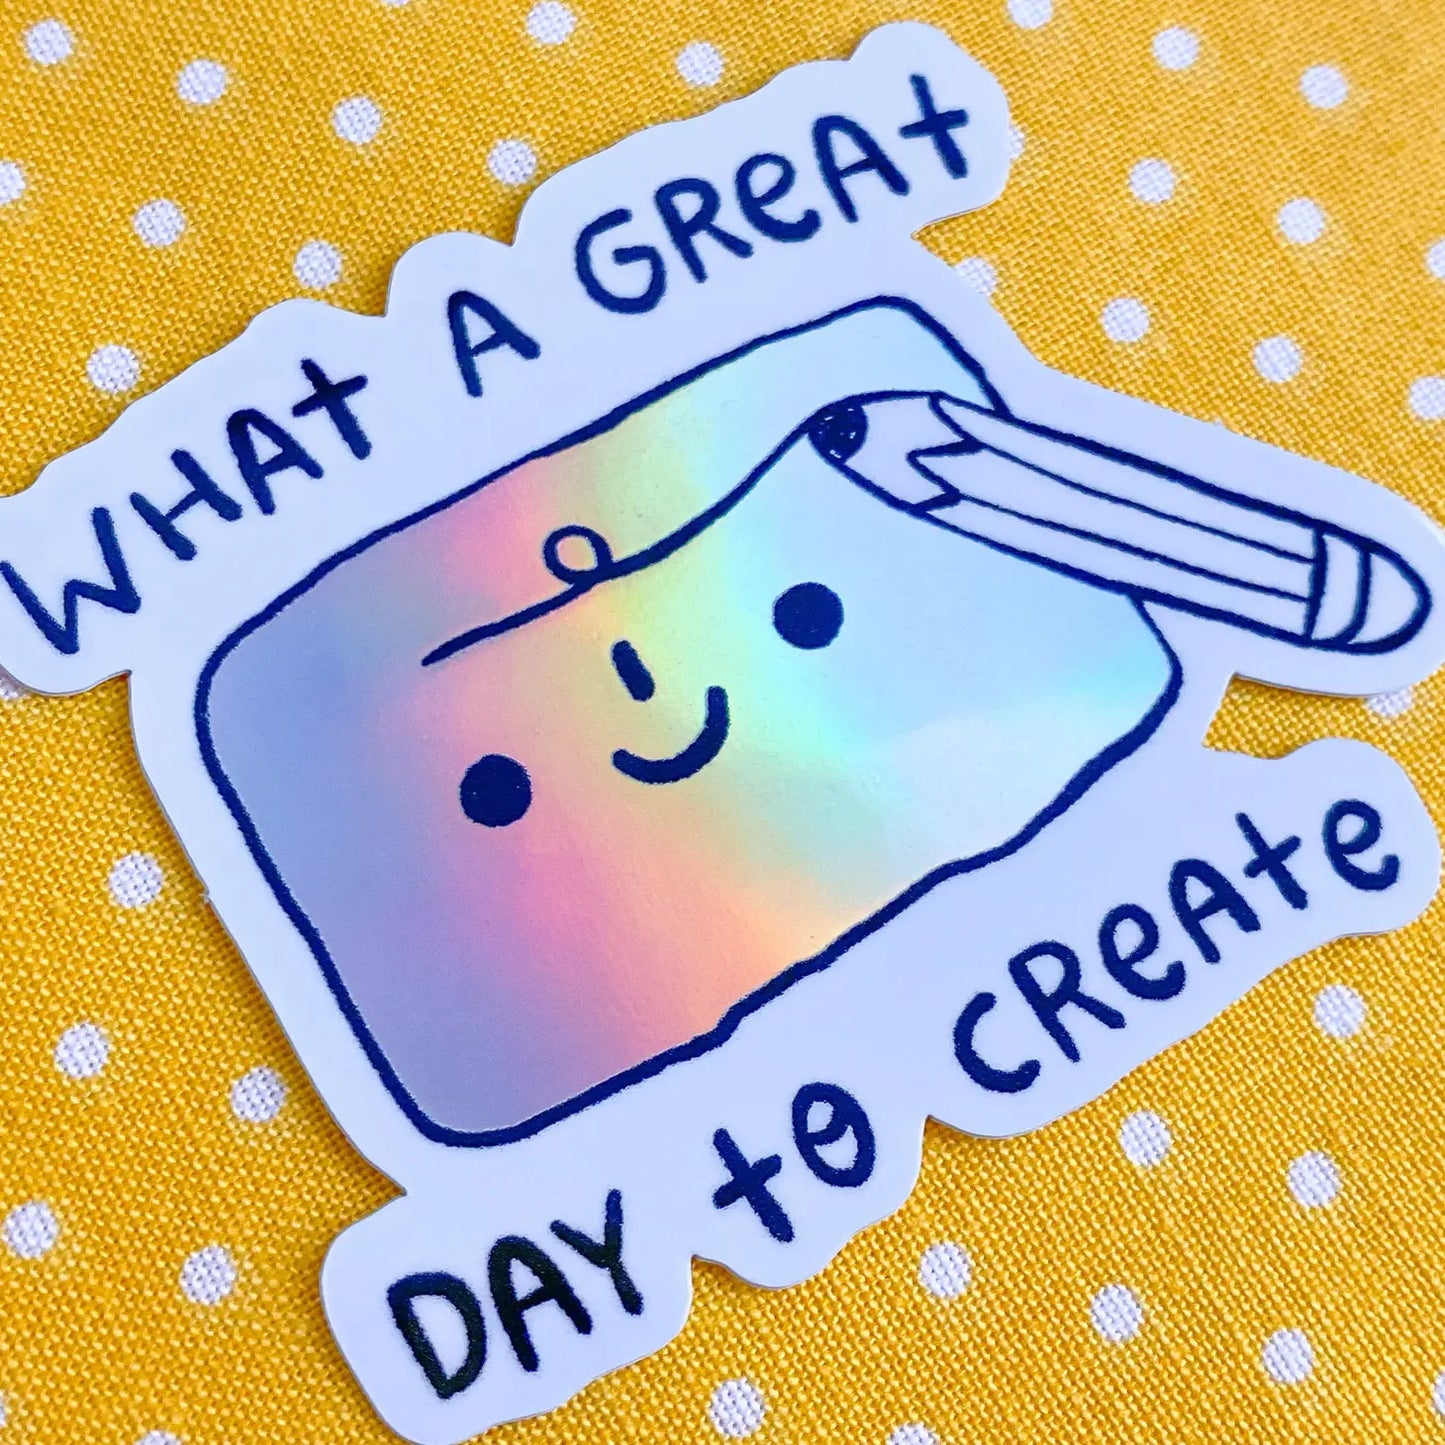 What a Great Day to Create! Vinyl Sticker